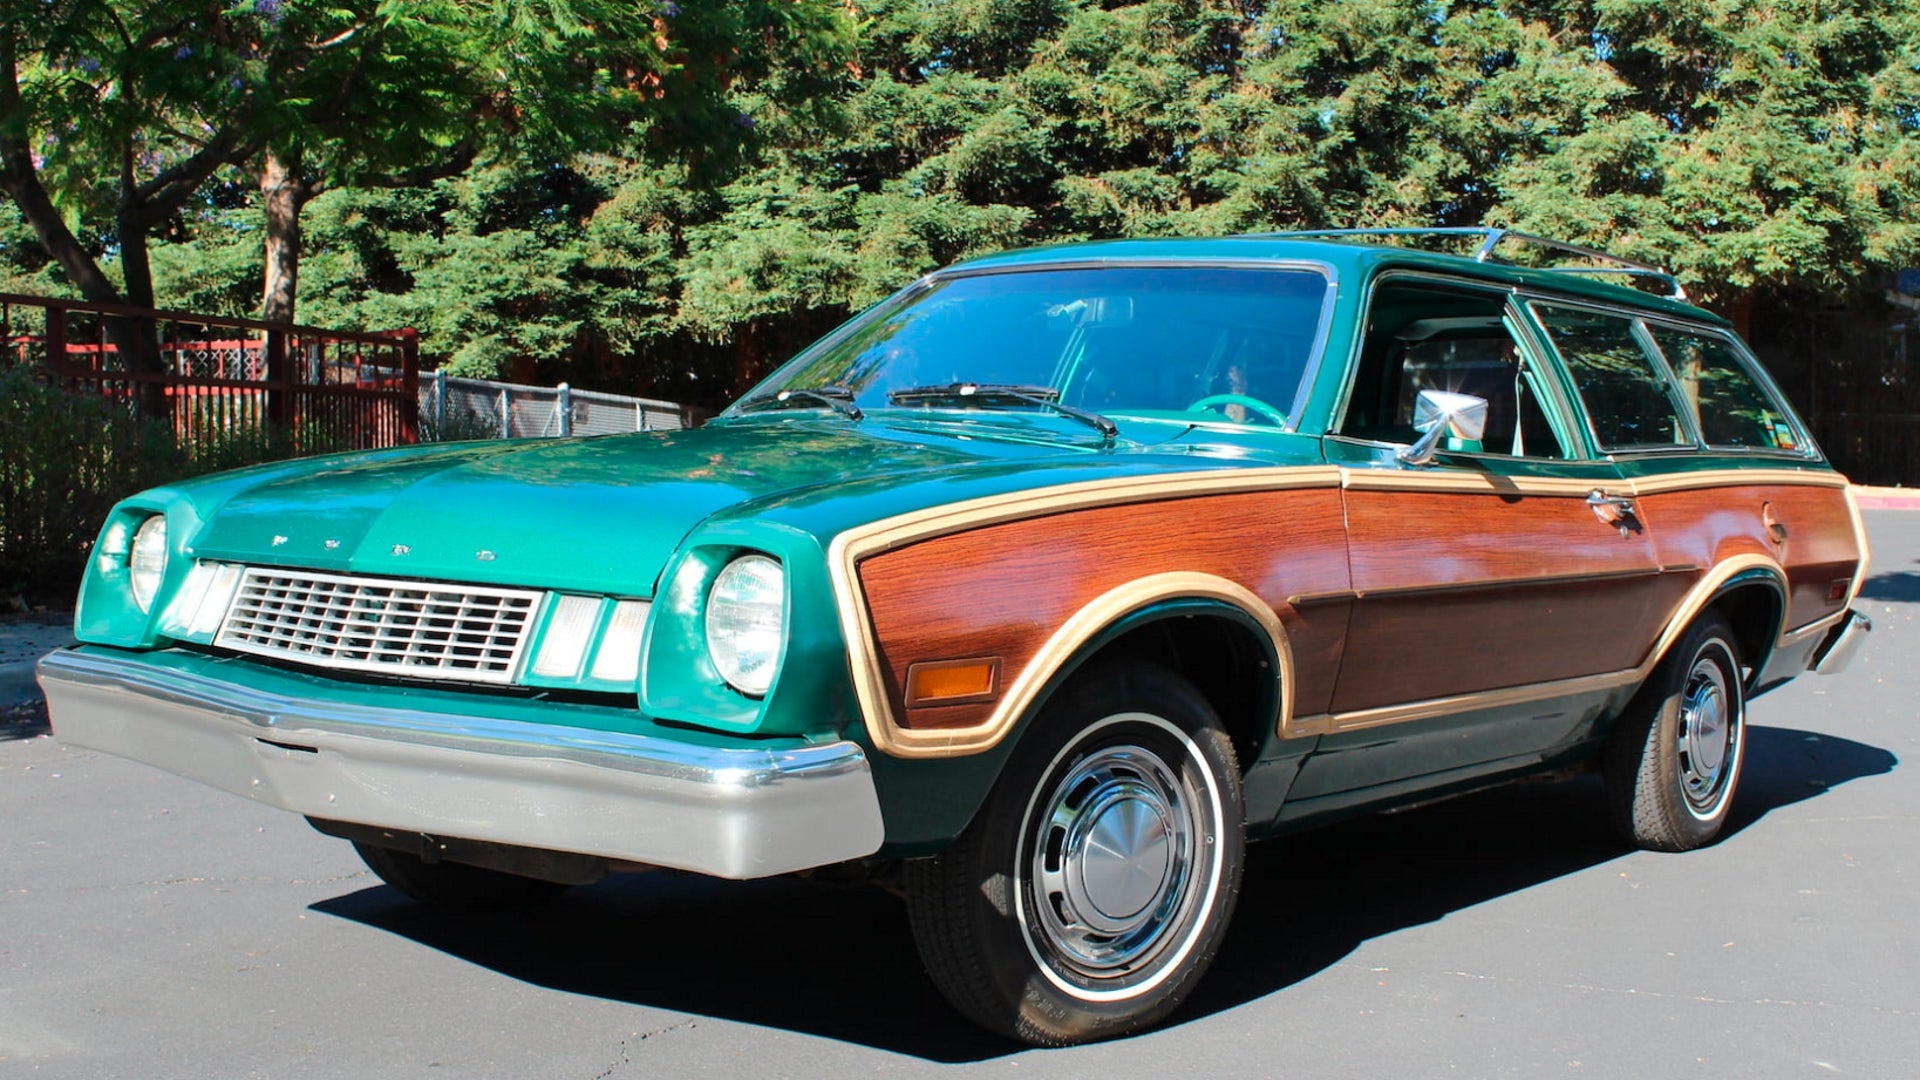 Someone Just Paid $33,000 For a 1978 Ford Pinto Squire Wagon.